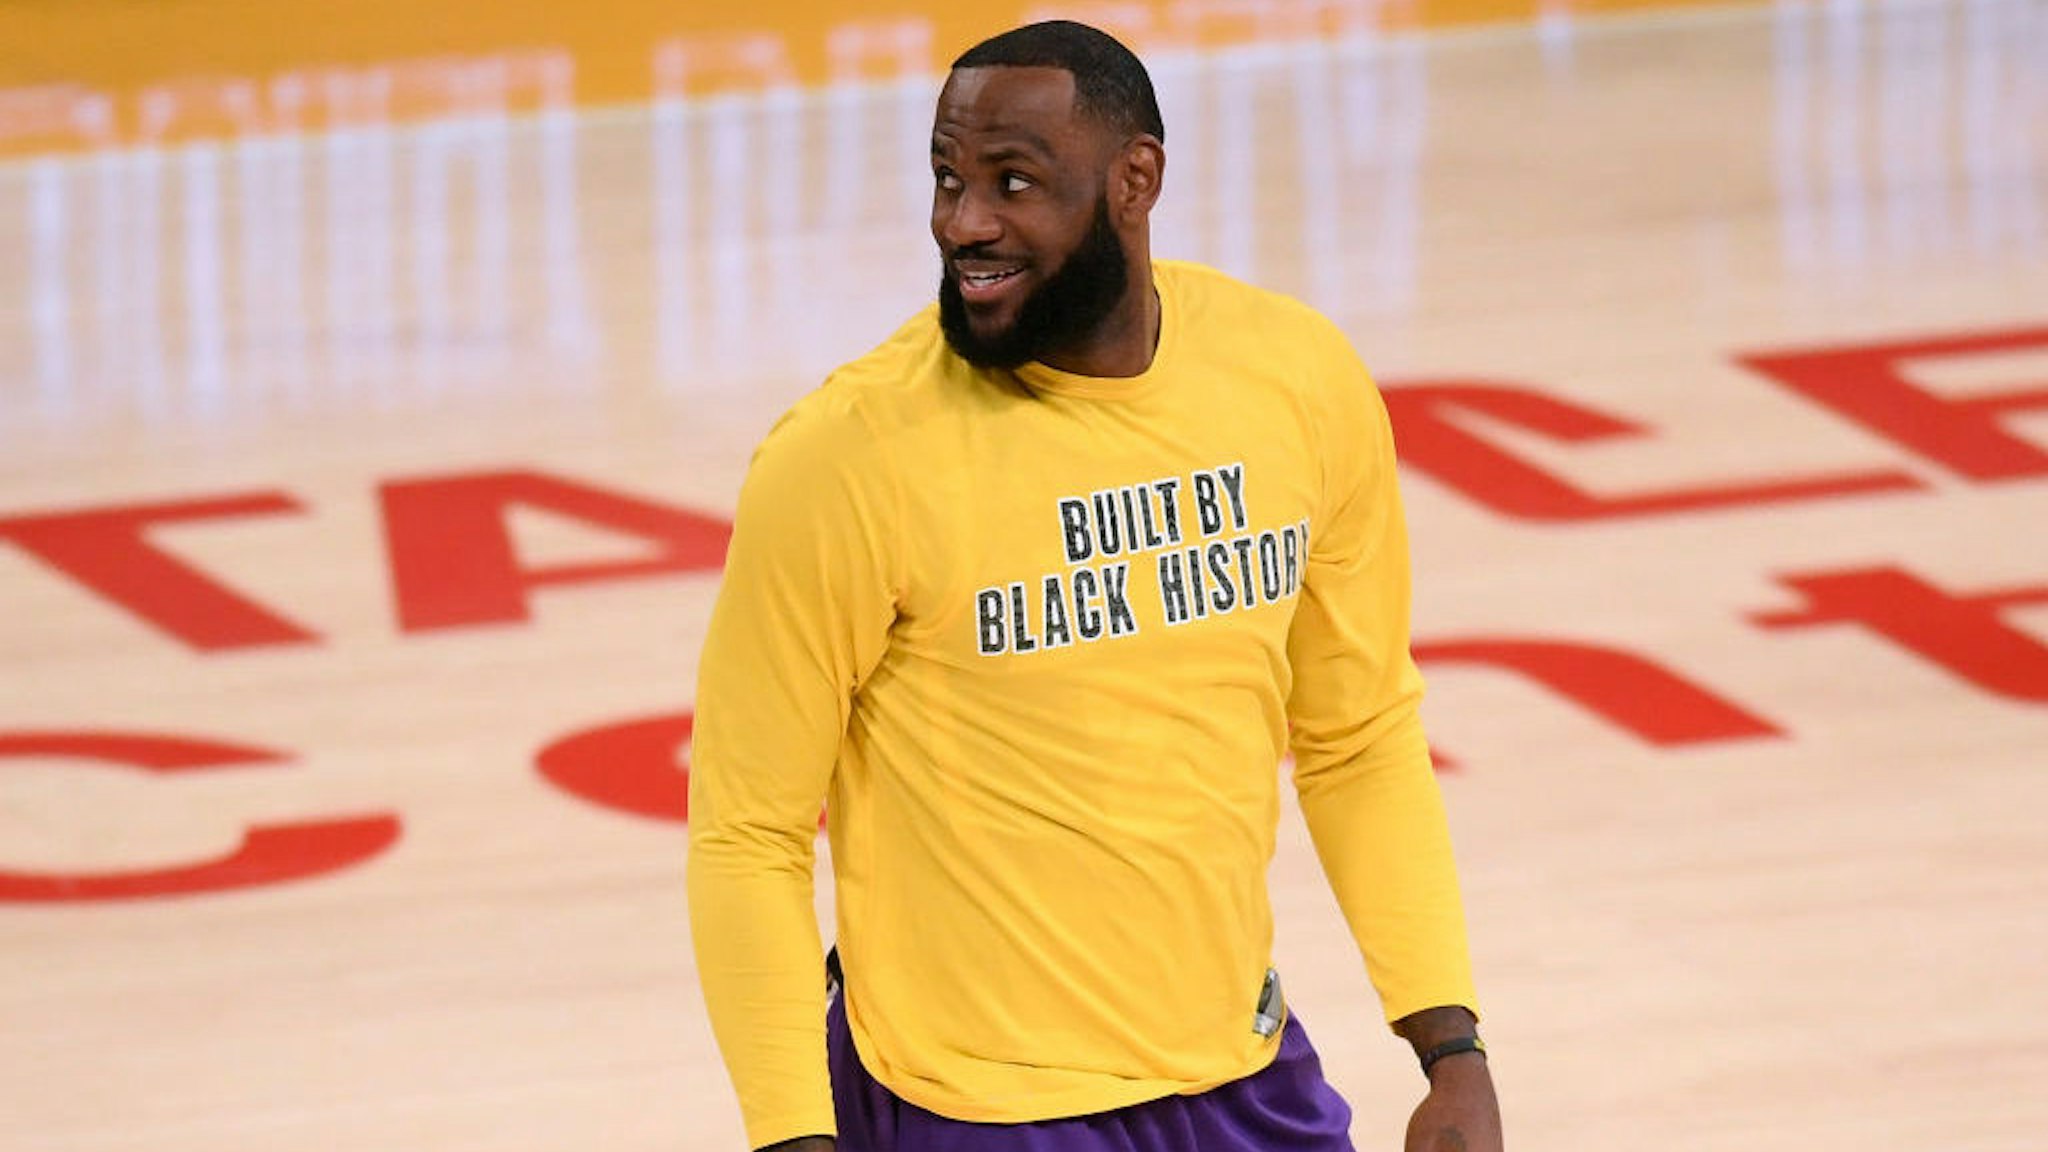 LOS ANGELES, CALIFORNIA - FEBRUARY 26: LeBron James #23 of the Los Angeles Lakers smiles as he warms up before the game against the Portland Trail Blazers at Staples Center on February 26, 2021 in Los Angeles, California. (Photo by Harry How/Getty Images)